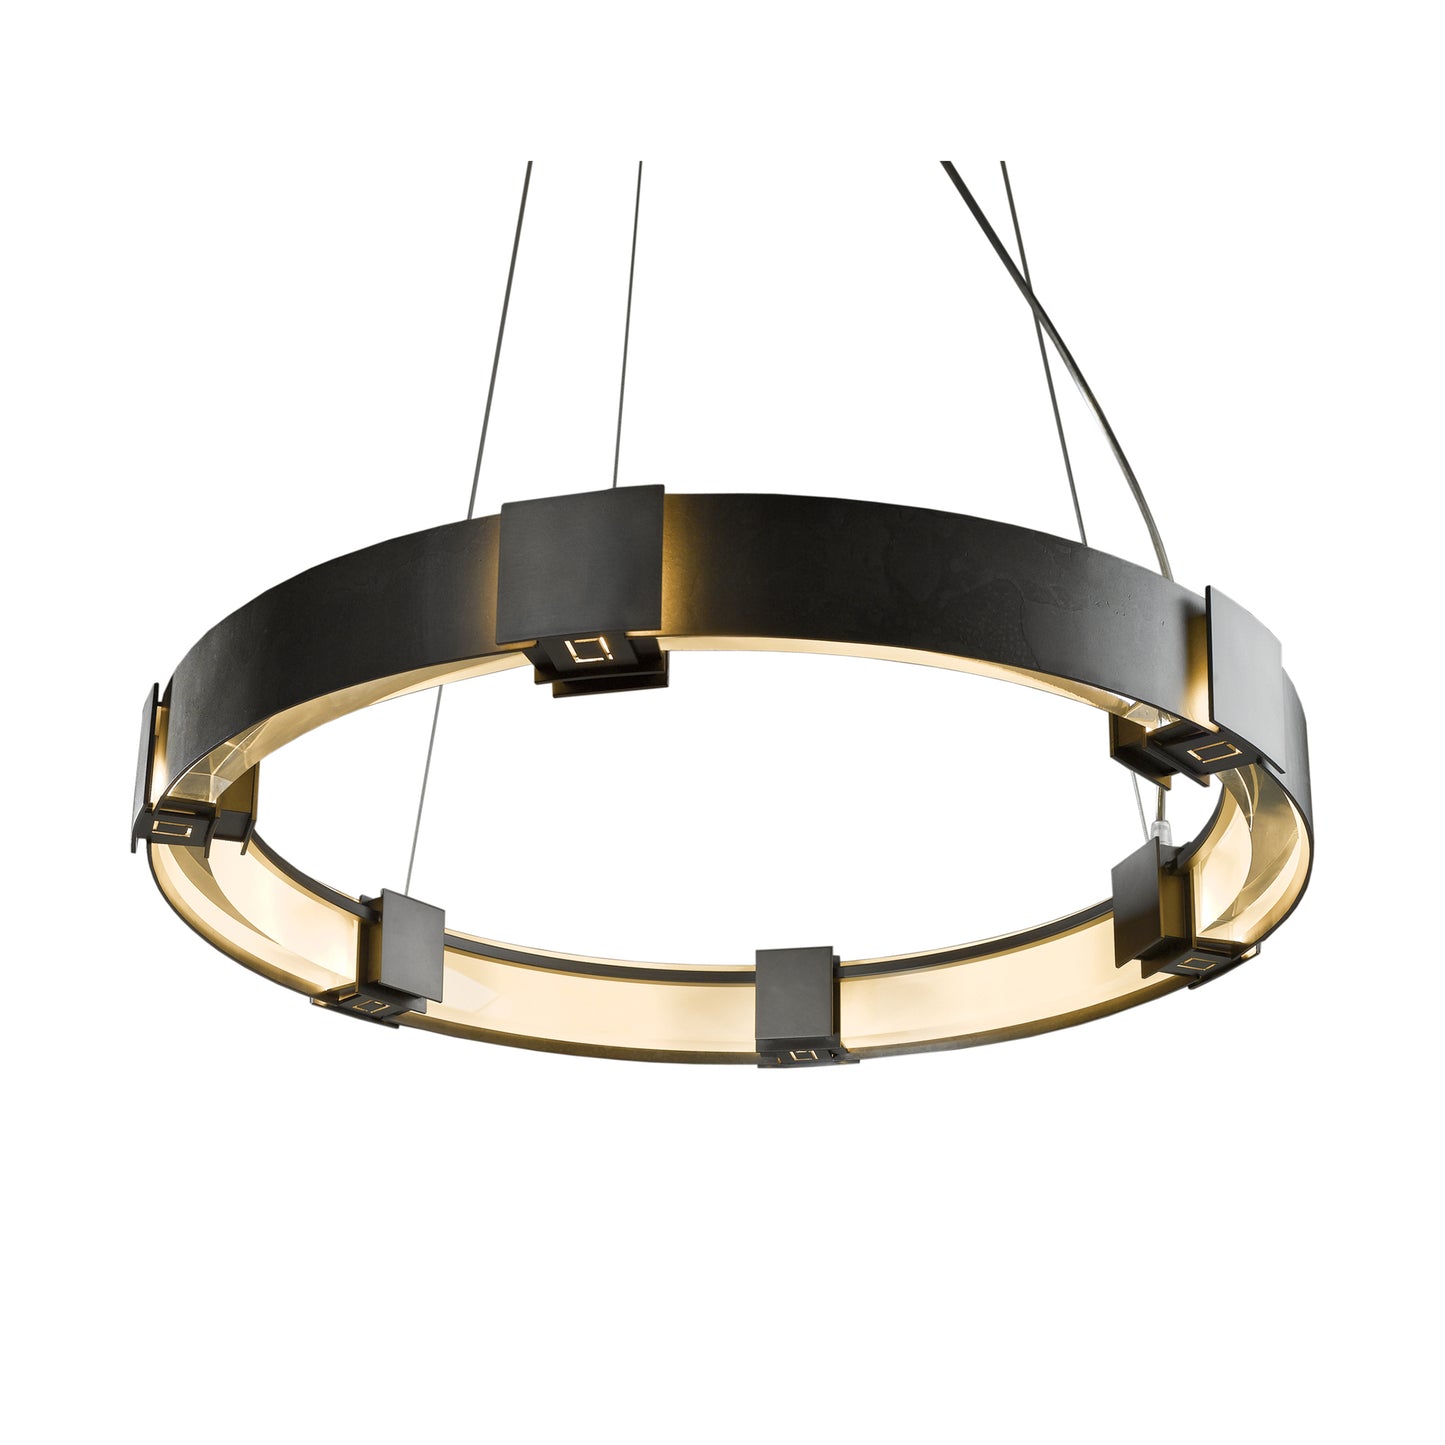 The Hubbardton Forge Aura Pendant is a stunning example of Hubbardton Forge lighting, meticulously handcrafted by Vermont artisans. This pendant light features a timeless circular shape and a striking black and white color palette.